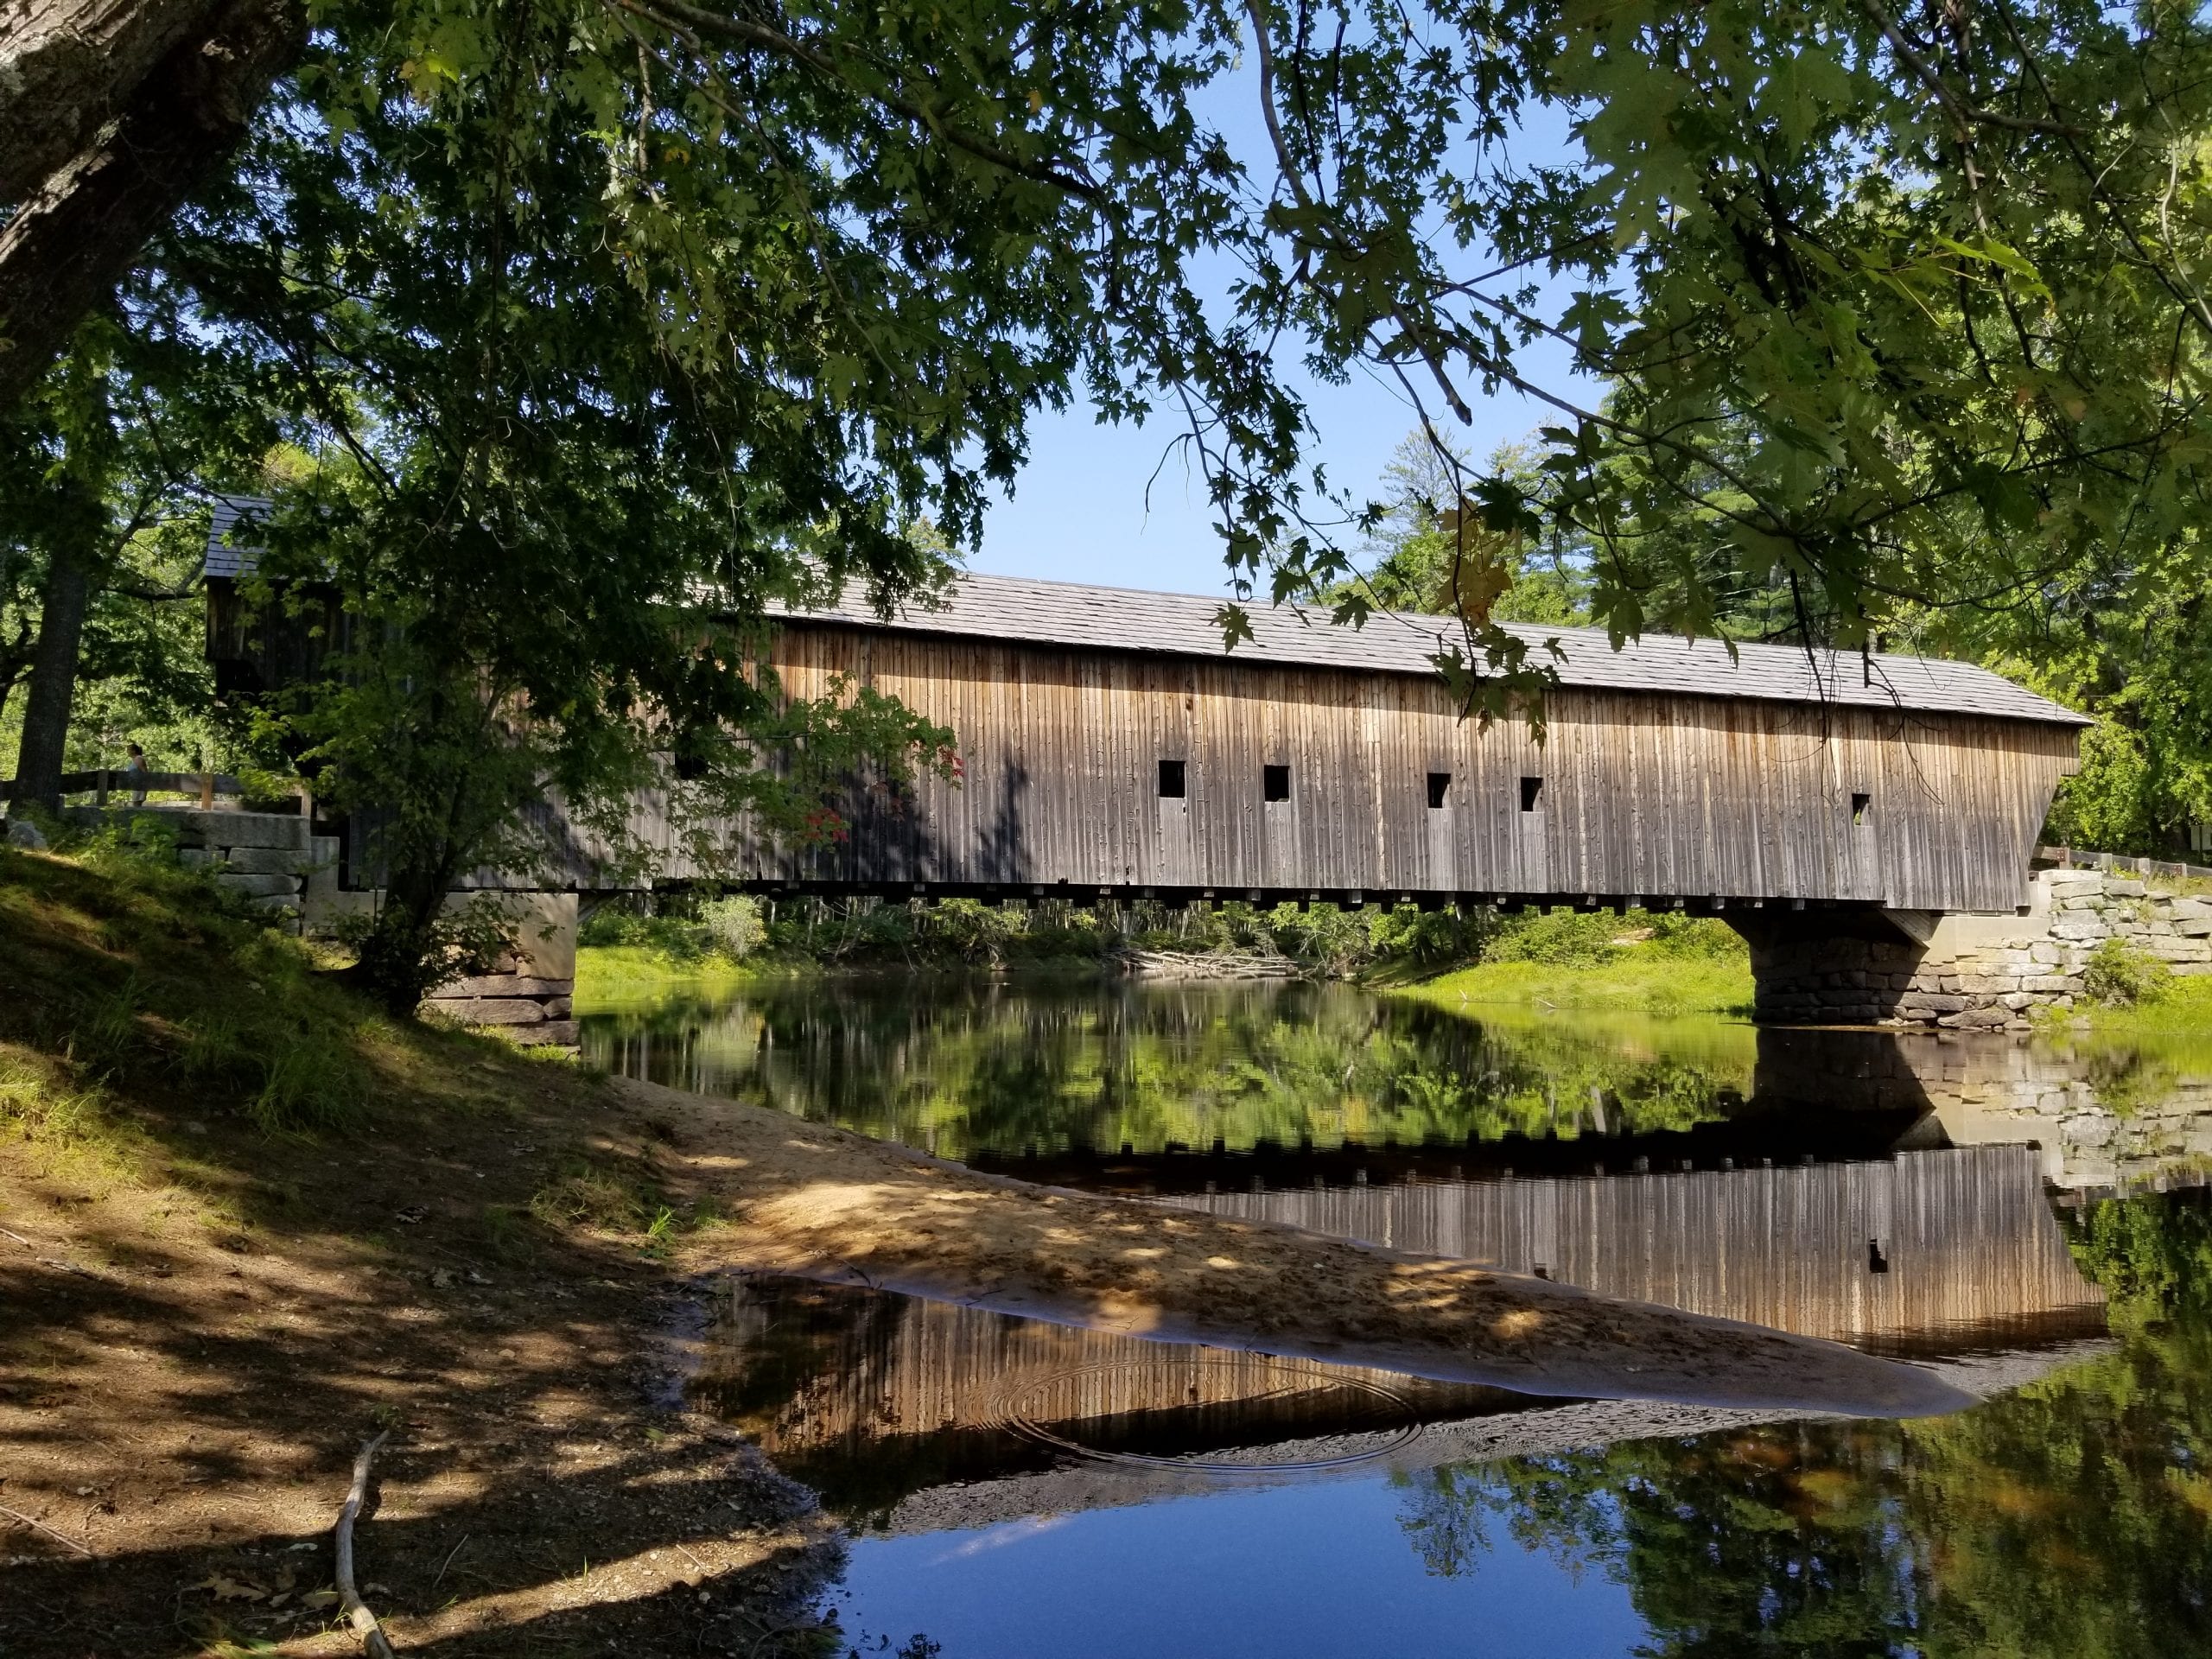 Maine Roadtrip Challenge: See 6 Beautiful Covered Bridges in one Day